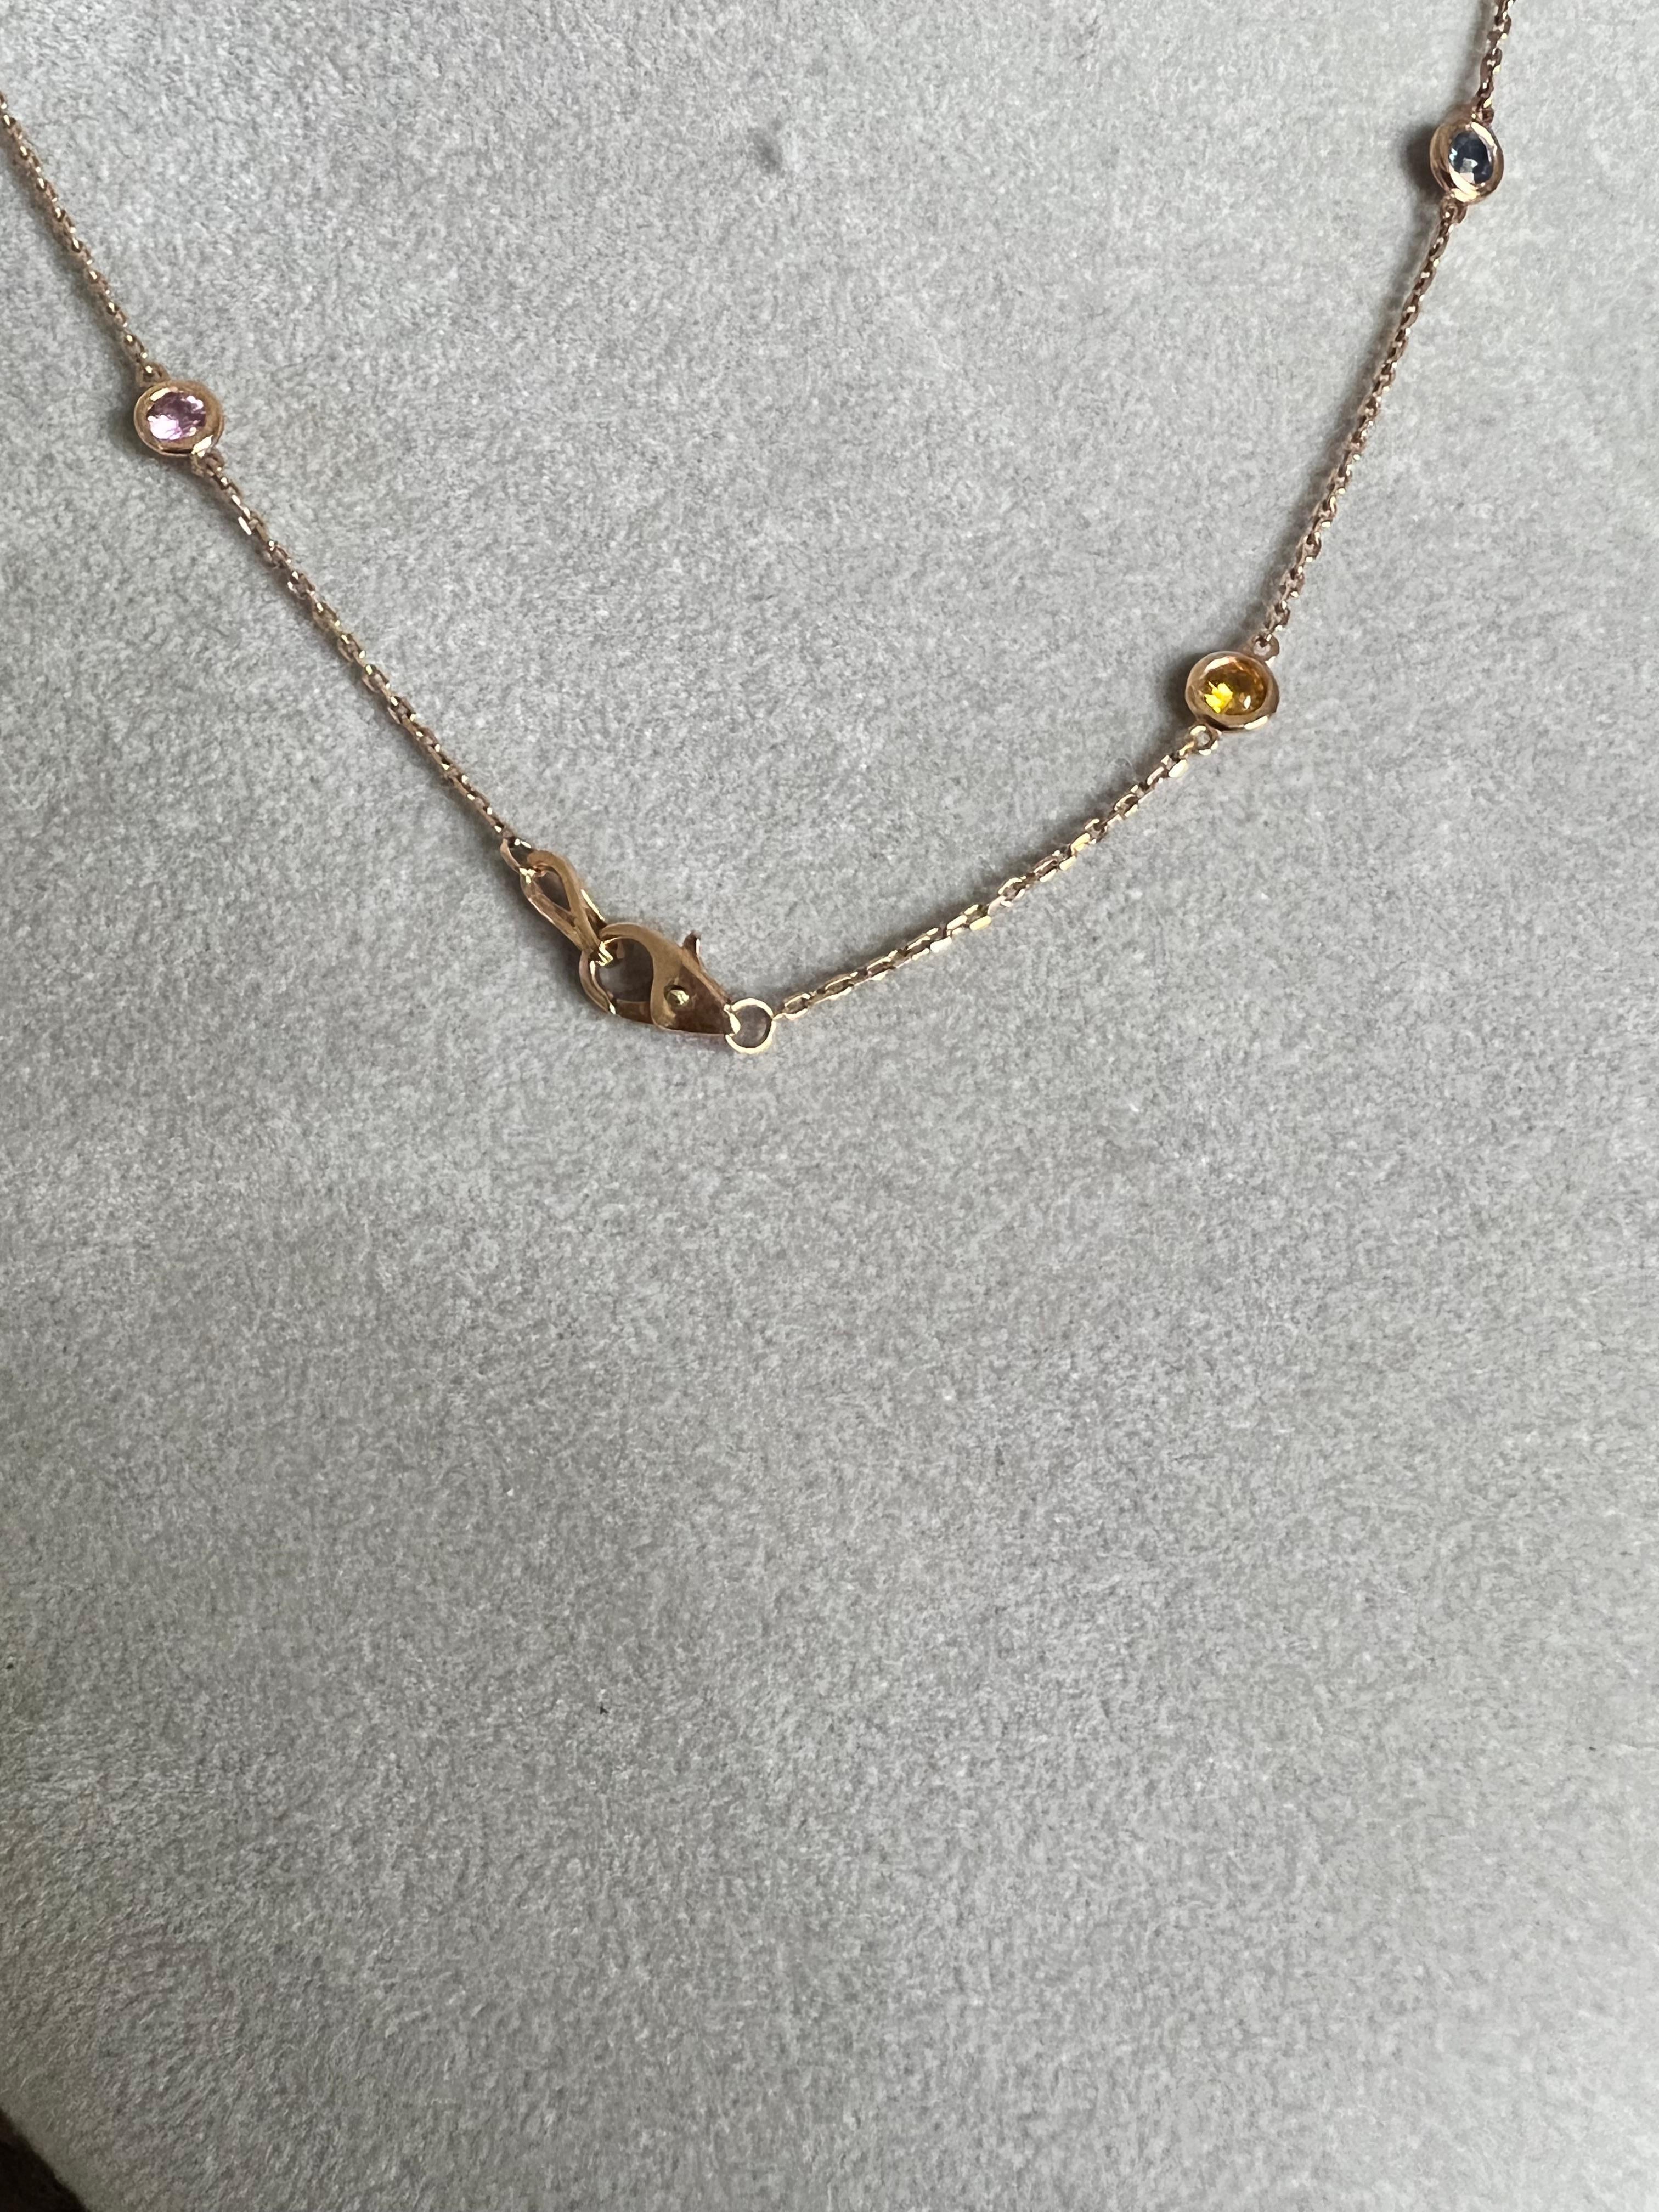 Round Cut 2.21 Carat Natural Multi Color Sapphire Rose Gold Chain Necklace  For Sale